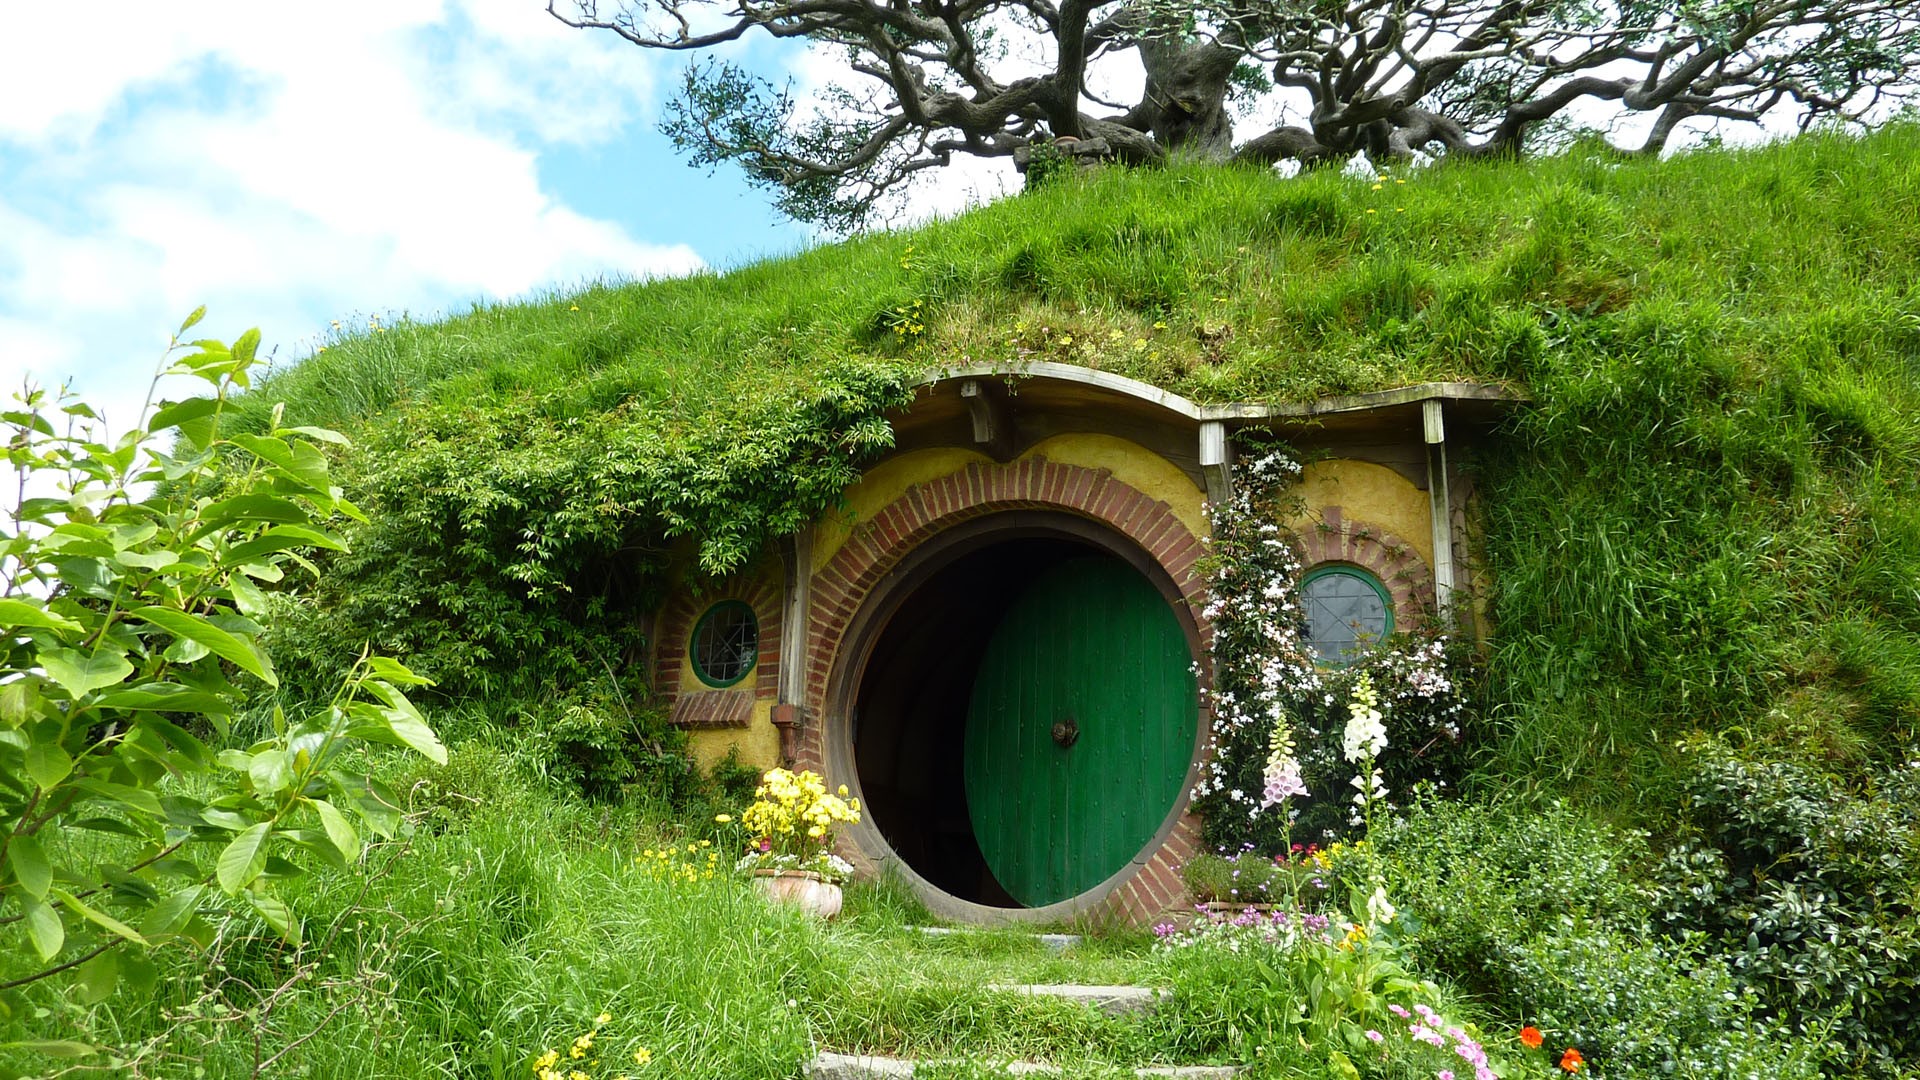 Nature Landscape House New Zealand Hobbiton Door Trees Grass Flowers Green J R R Tolkien The Lord Of 1920x1080